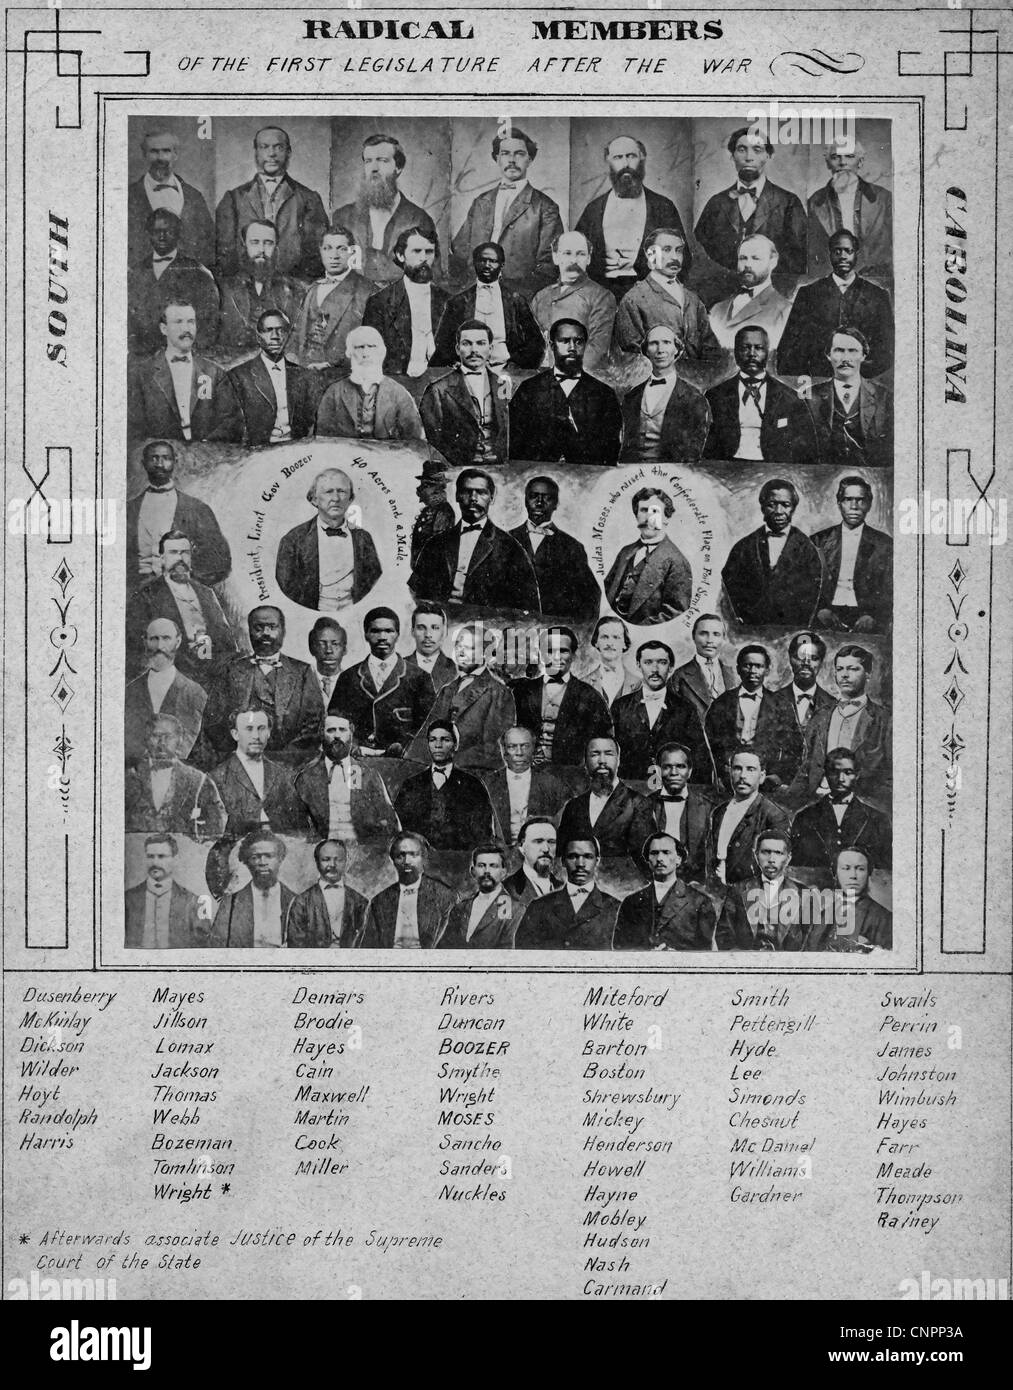 Photomontage of members of the first South Carolina legislature following the Civil War, mounted on card with each member identified, circa 1876 Stock Photo